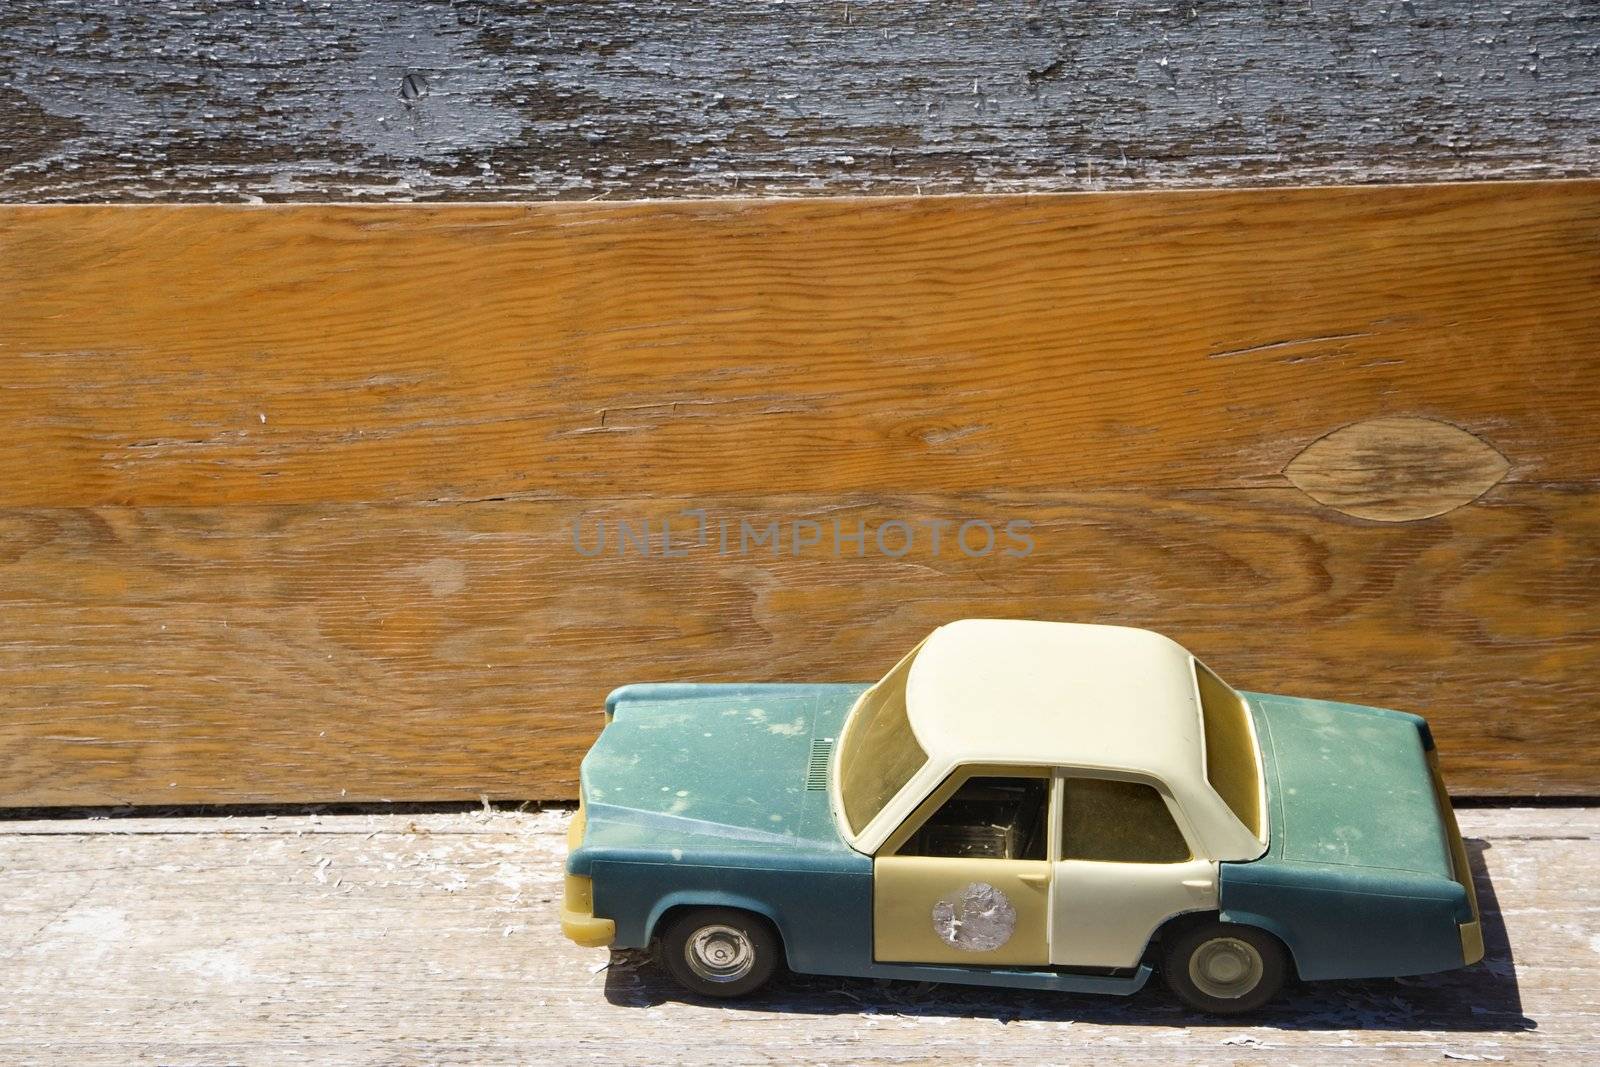 Toy police car on wooden shelf.